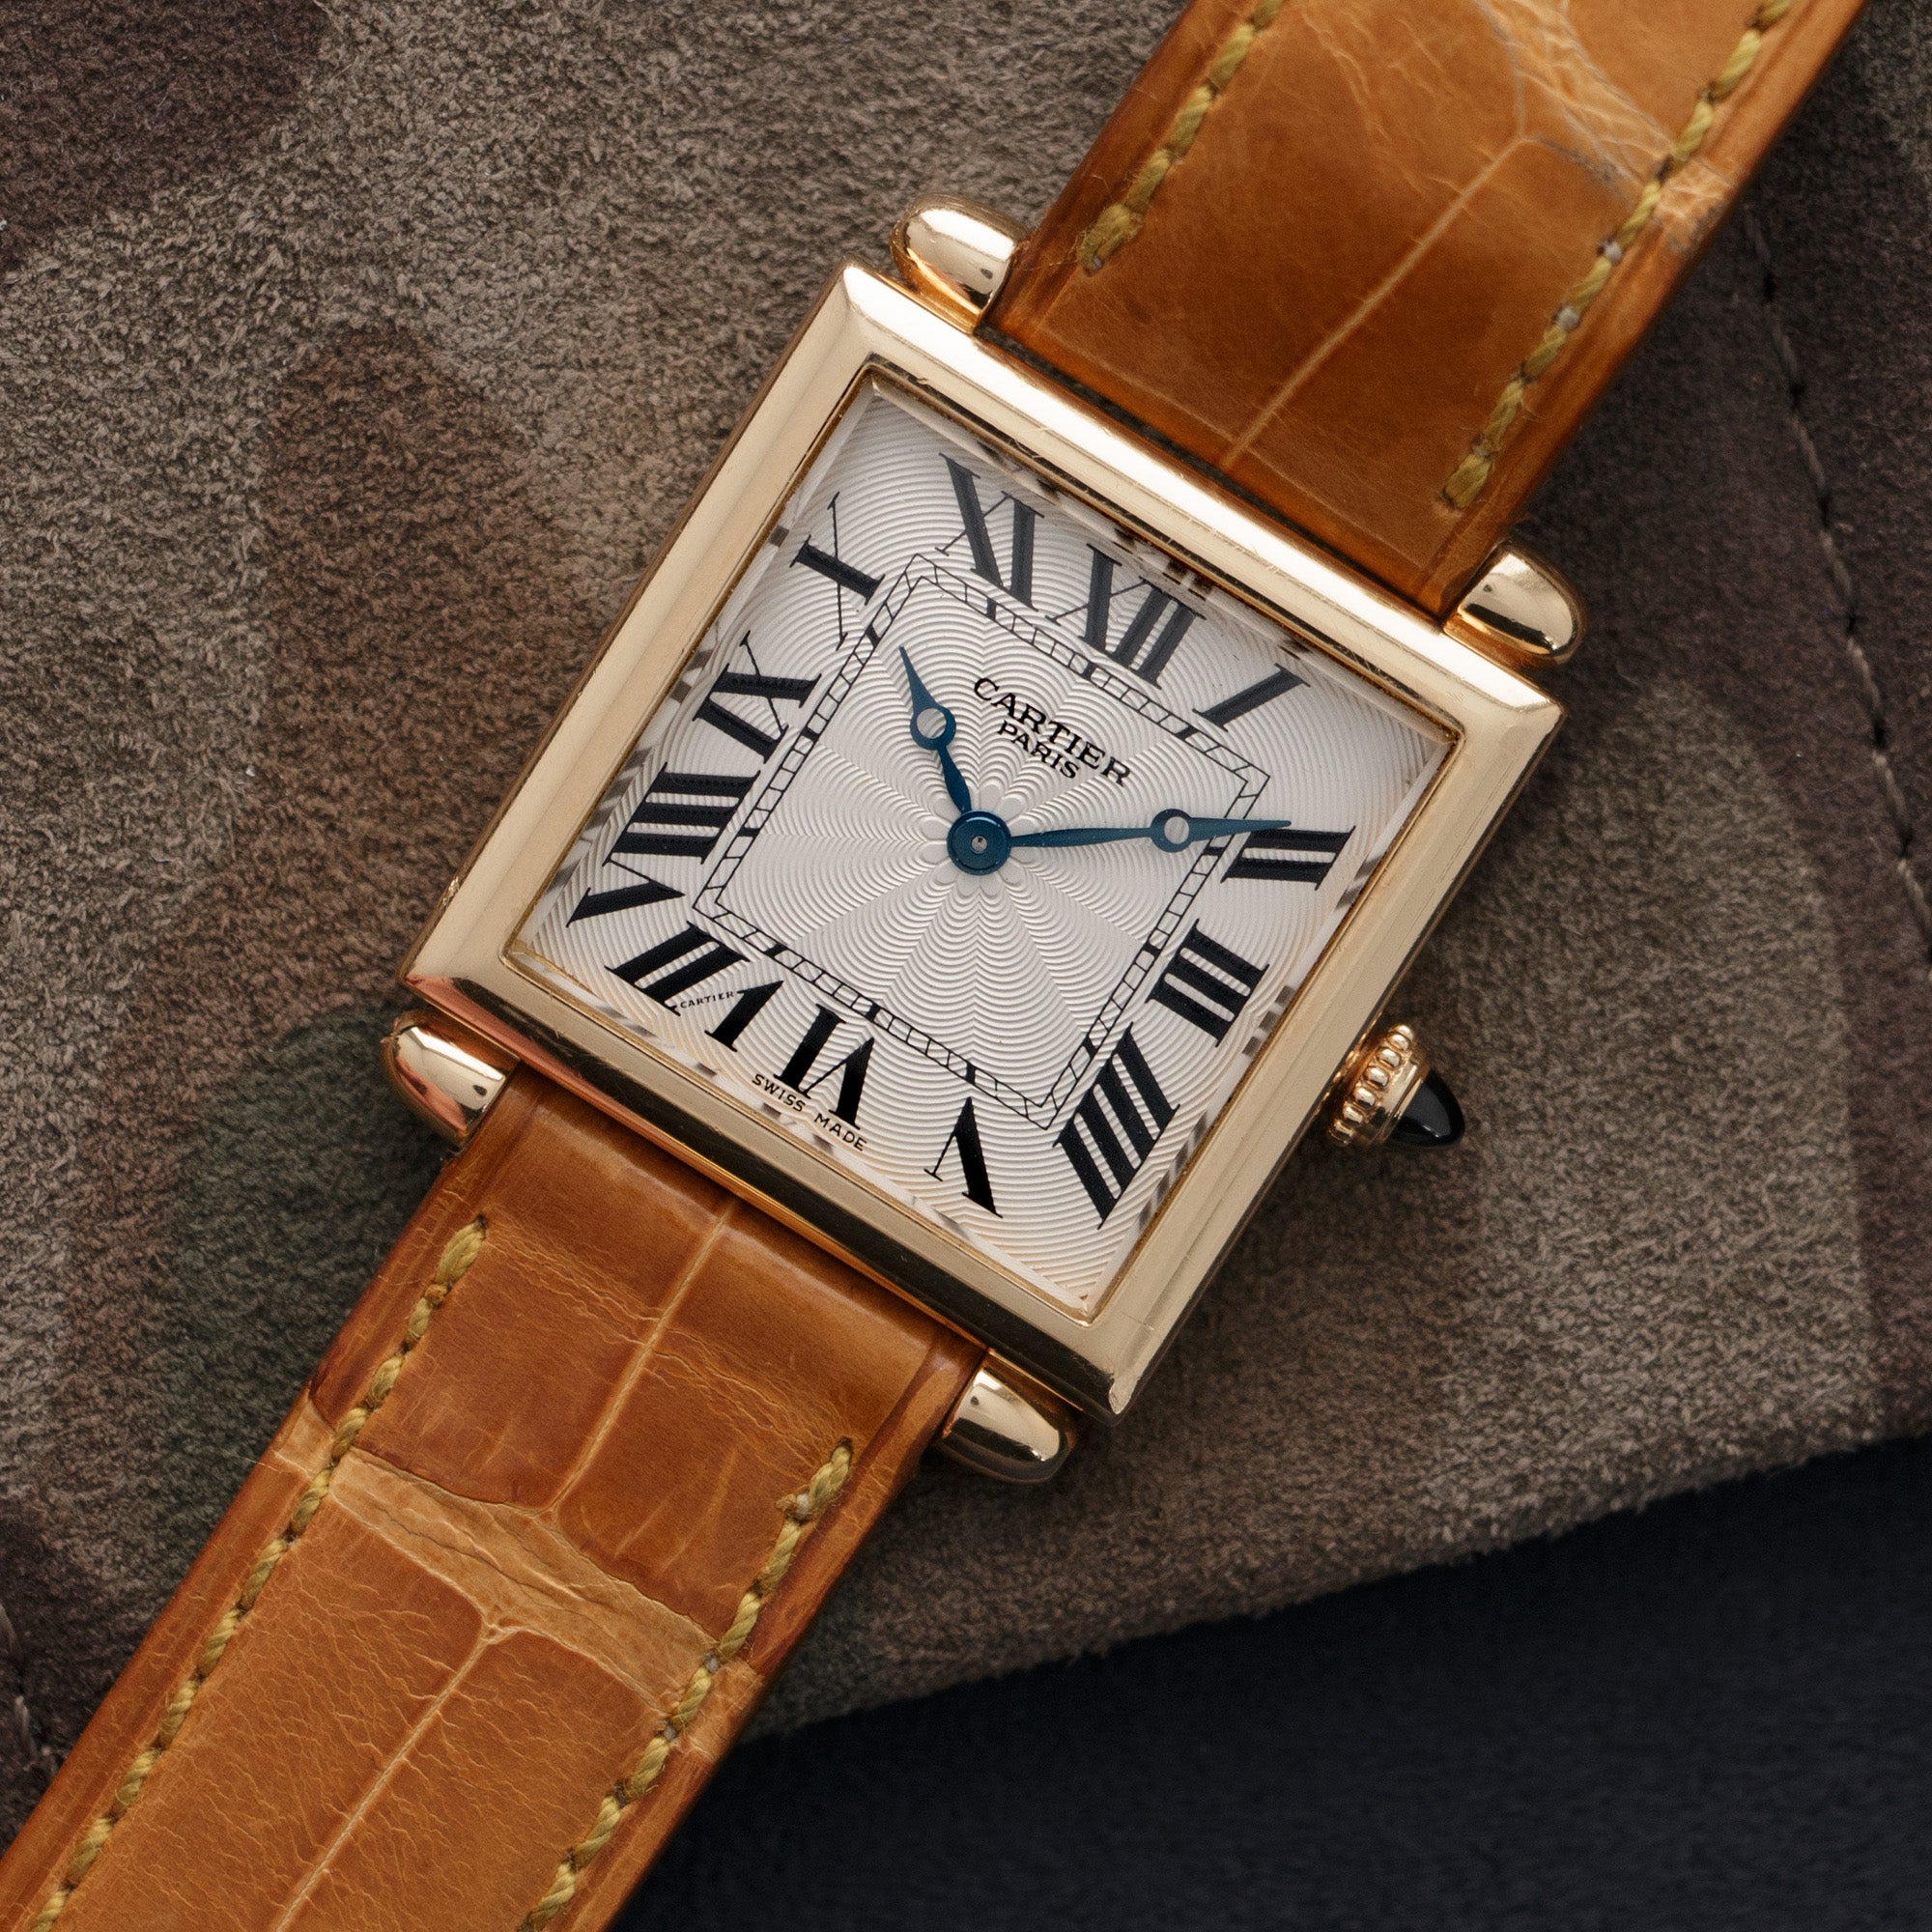 Cartier - Cartier Yellow Gold Manual Tank Obus Watch with Display Caseback - The Keystone Watches